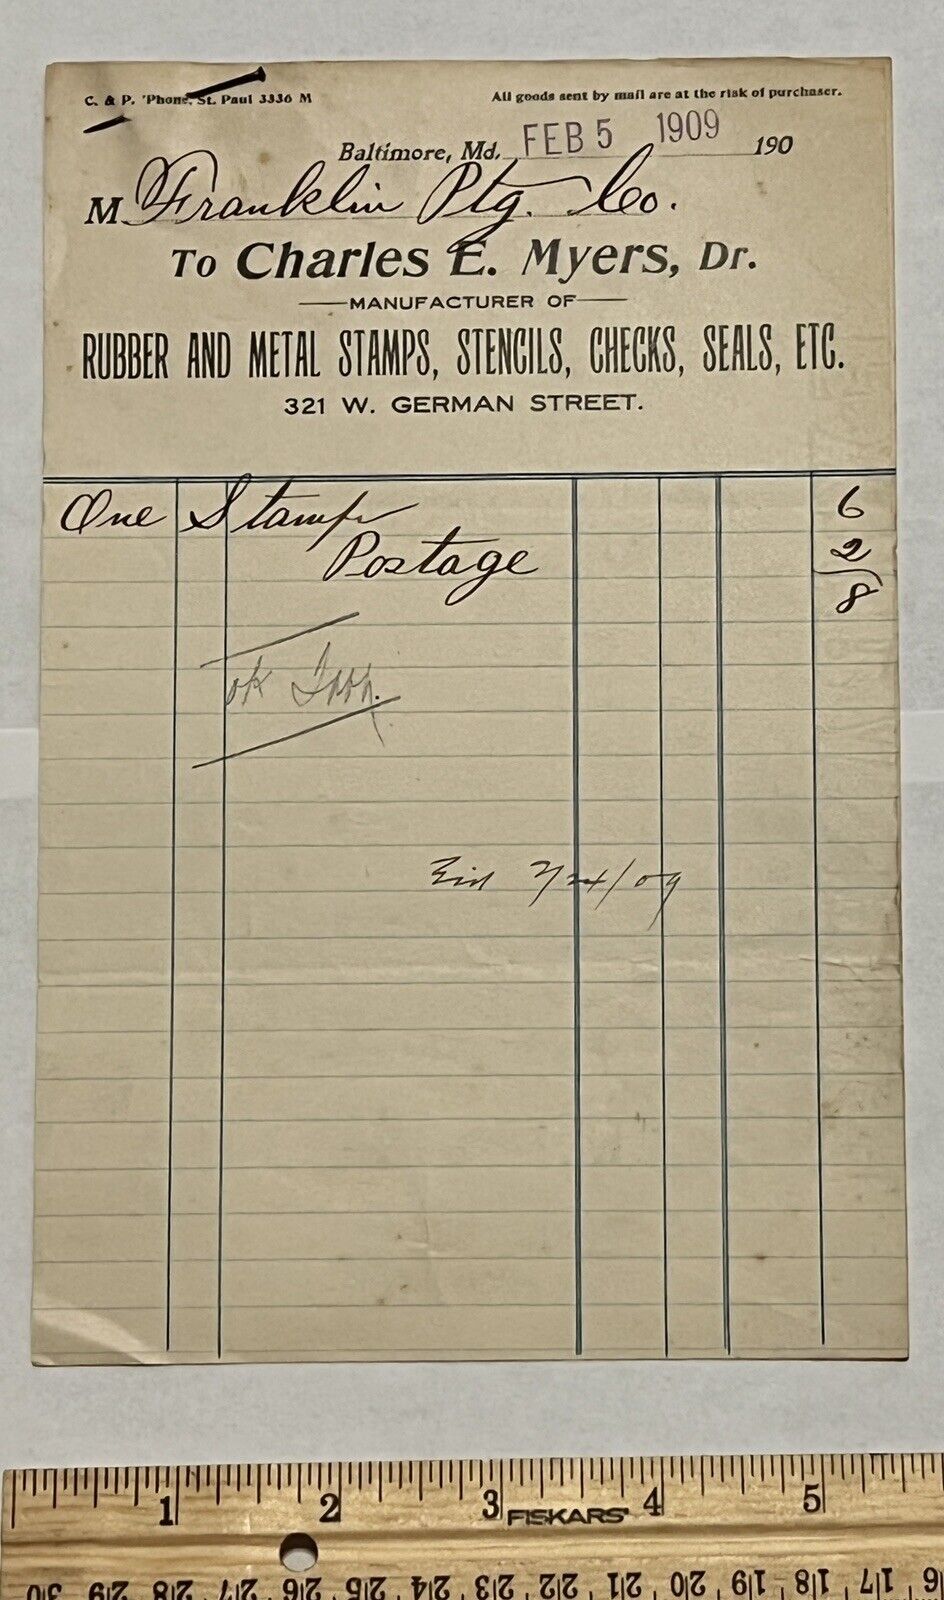 1909 CHARLES E. MYERS BALTIMORE MD TWO INVOICES STAPLED TOGETHER BY NAIL